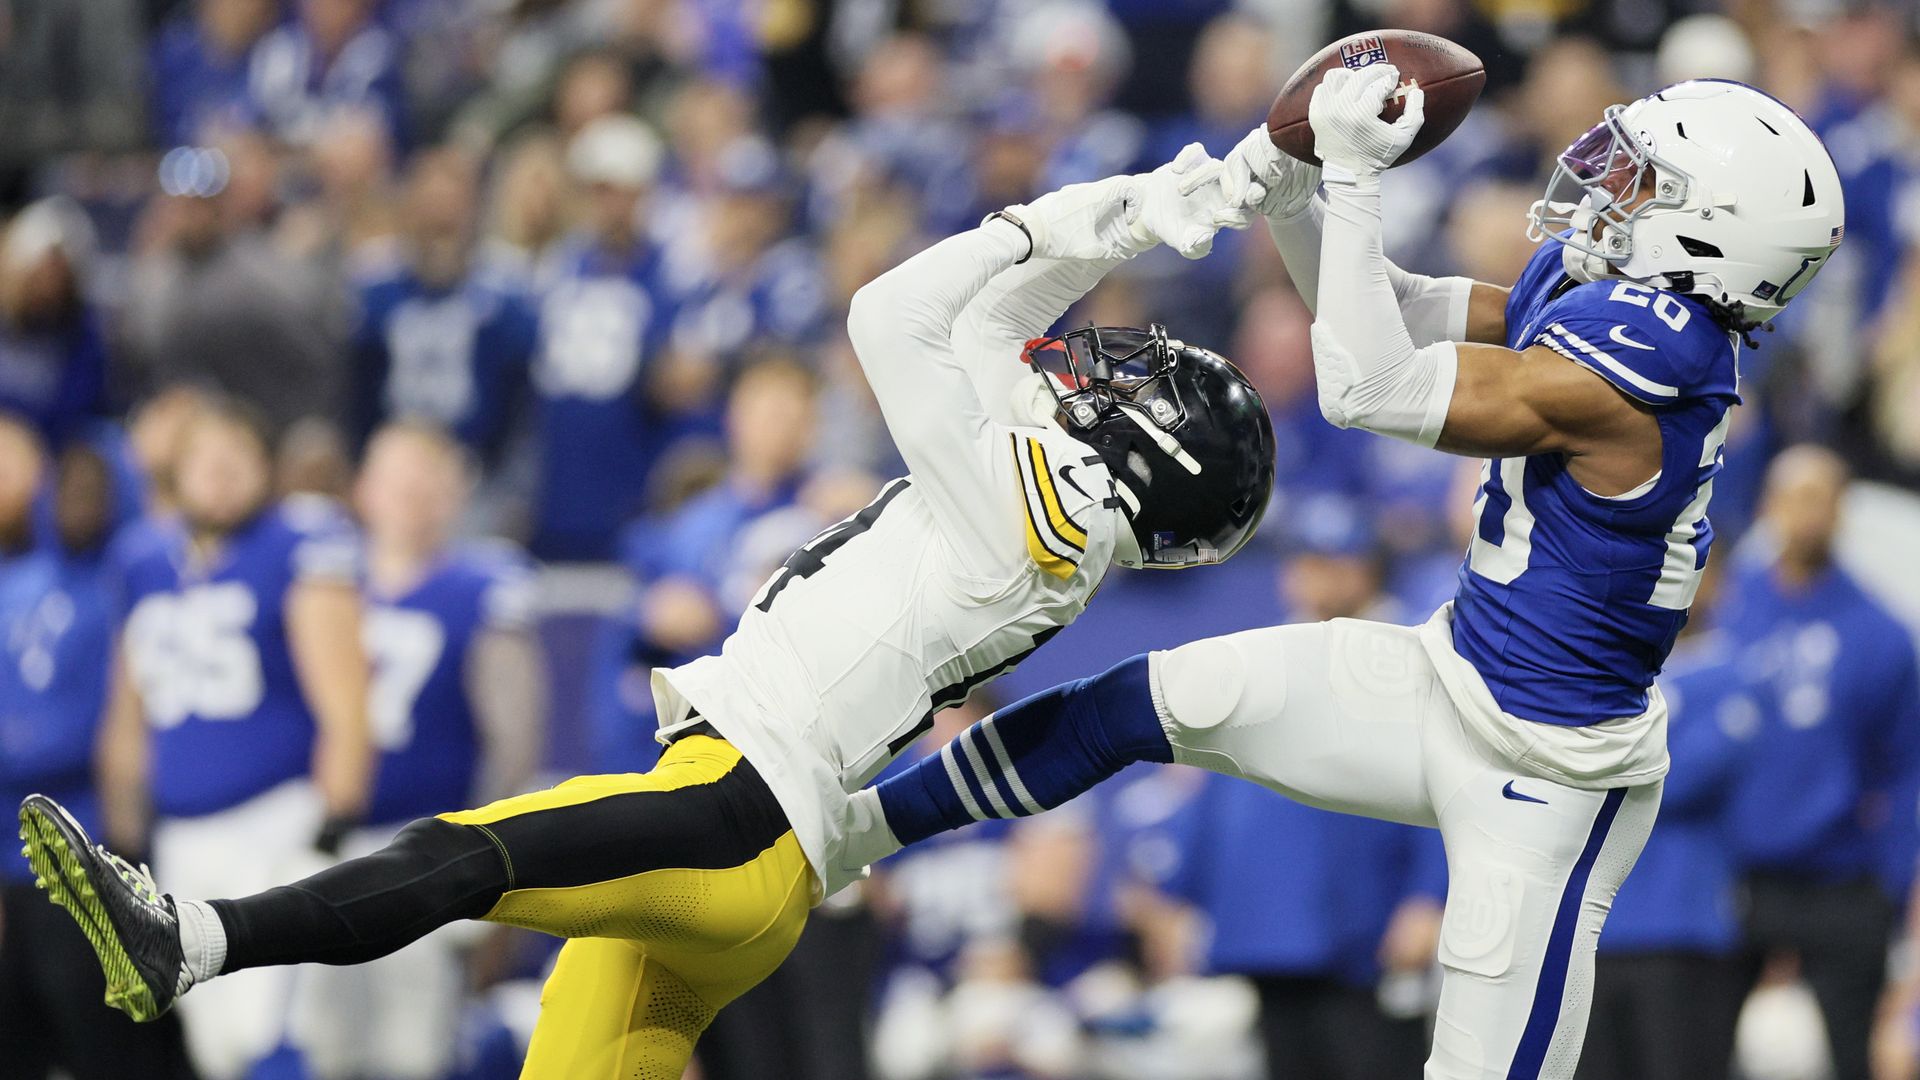 Nick Cross of the Colts intercepts a pass intended for George Pickens of the Steelers.